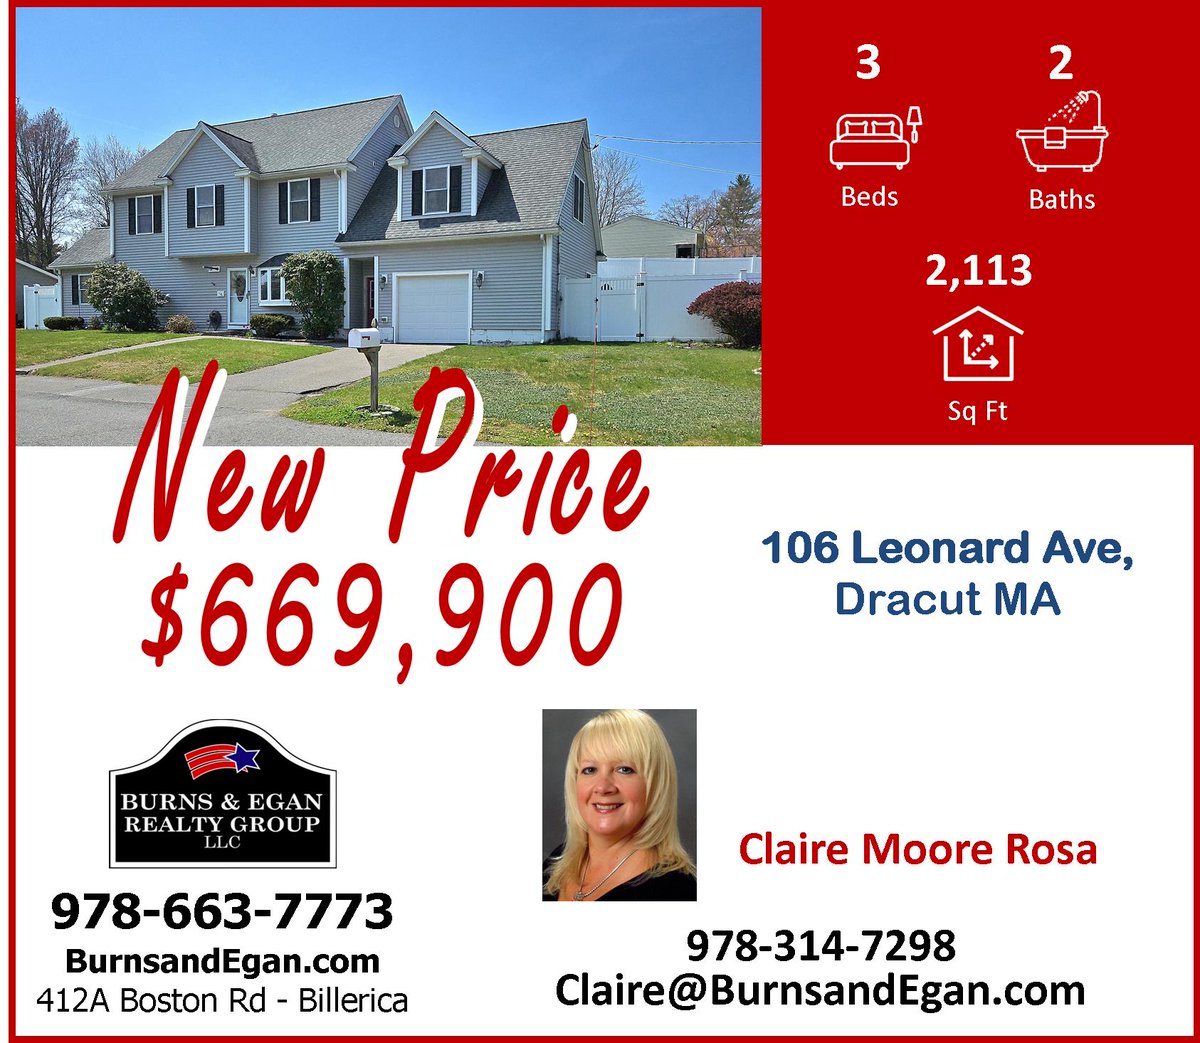 New Price!
#Dracutrealestate #DracutMArealestate #DracutMA  #realestatemarket #justlisted #DracutMAhomes #homesforsale #homeownership #realestate #burnsandegan #dreamhome #forsale #househunting #homes #newhome #house